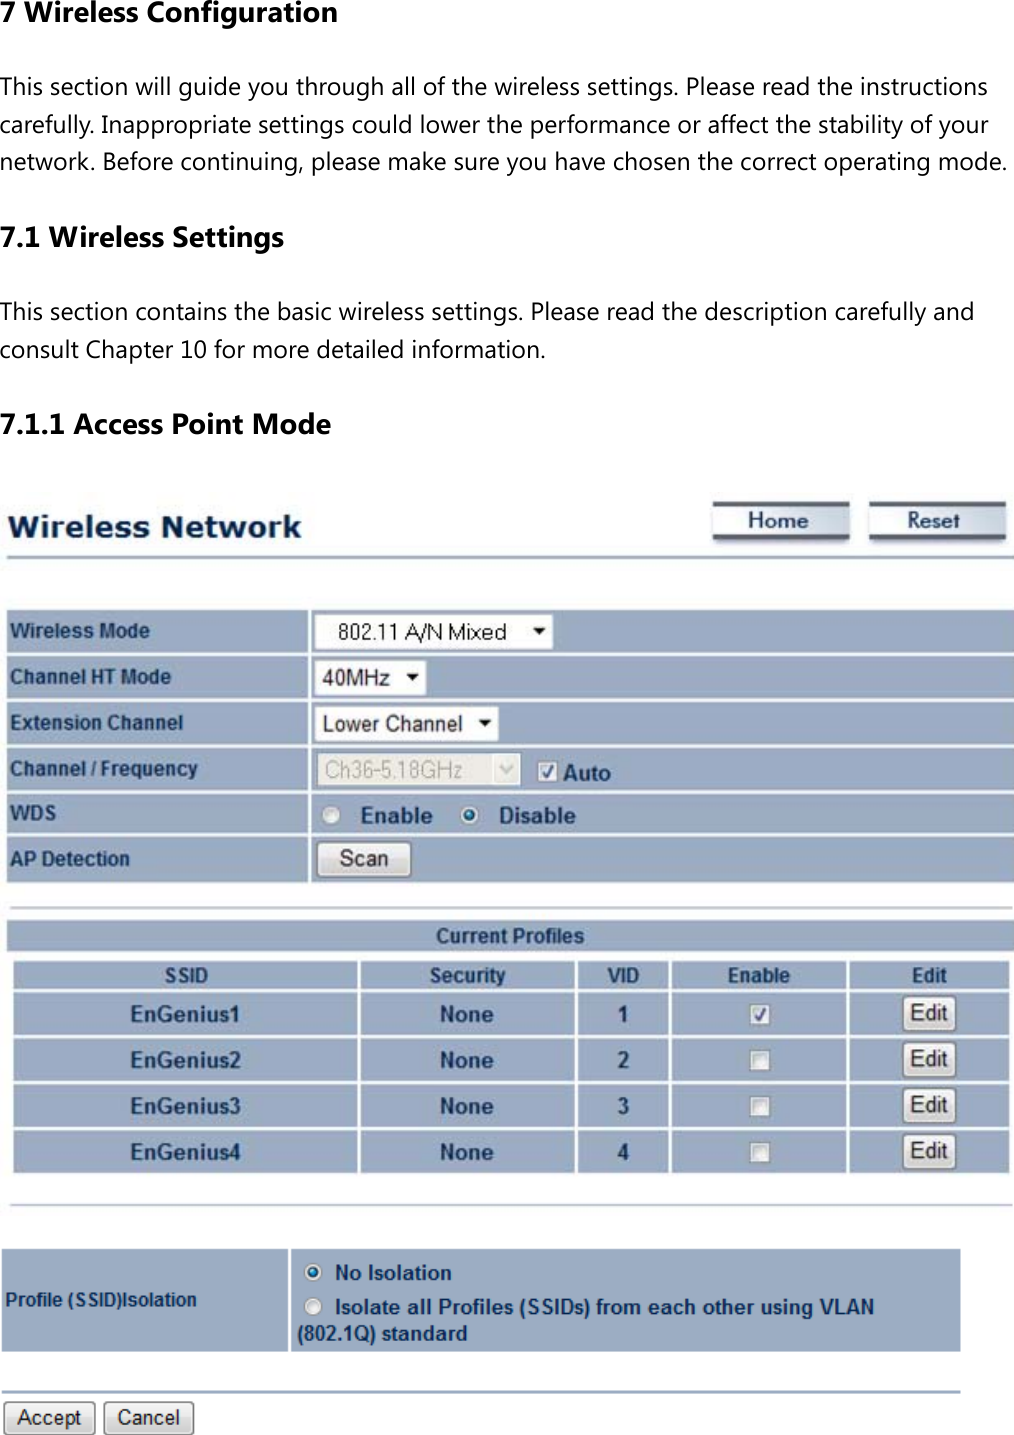 7 Wireless Configuration This section will guide you through all of the wireless settings. Please read the instructions carefully. Inappropriate settings could lower the performance or affect the stability of your network. Before continuing, please make sure you have chosen the correct operating mode. 7.1 Wireless Settings This section contains the basic wireless settings. Please read the description carefully and consult Chapter 10 for more detailed information. 7.1.1 Access Point Mode    